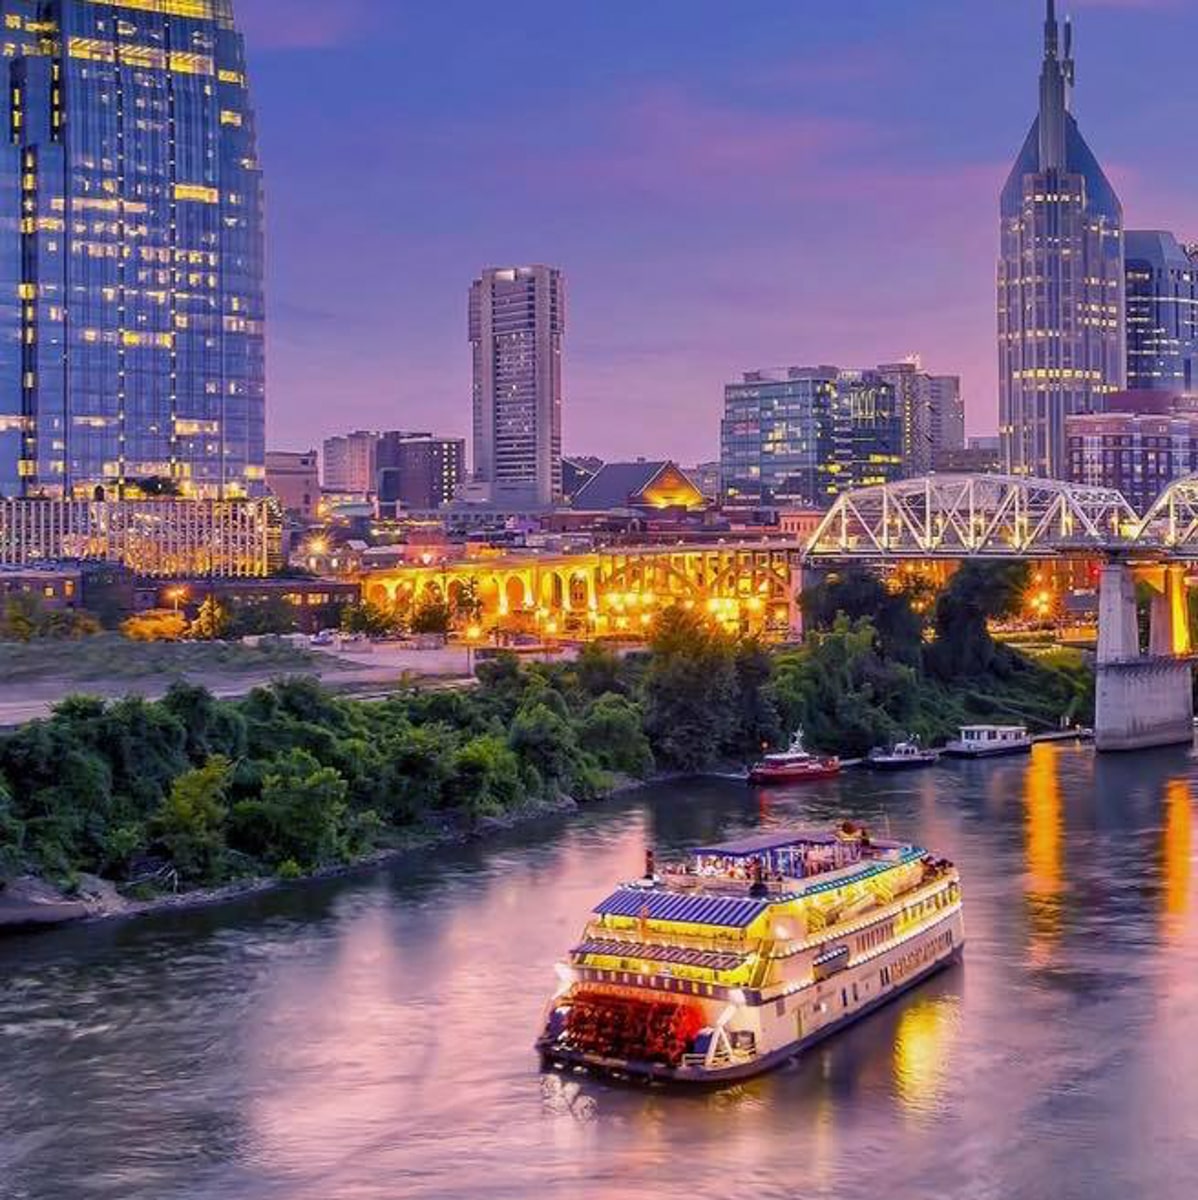 Dinner Cruise in Nashville with lights and city skyline